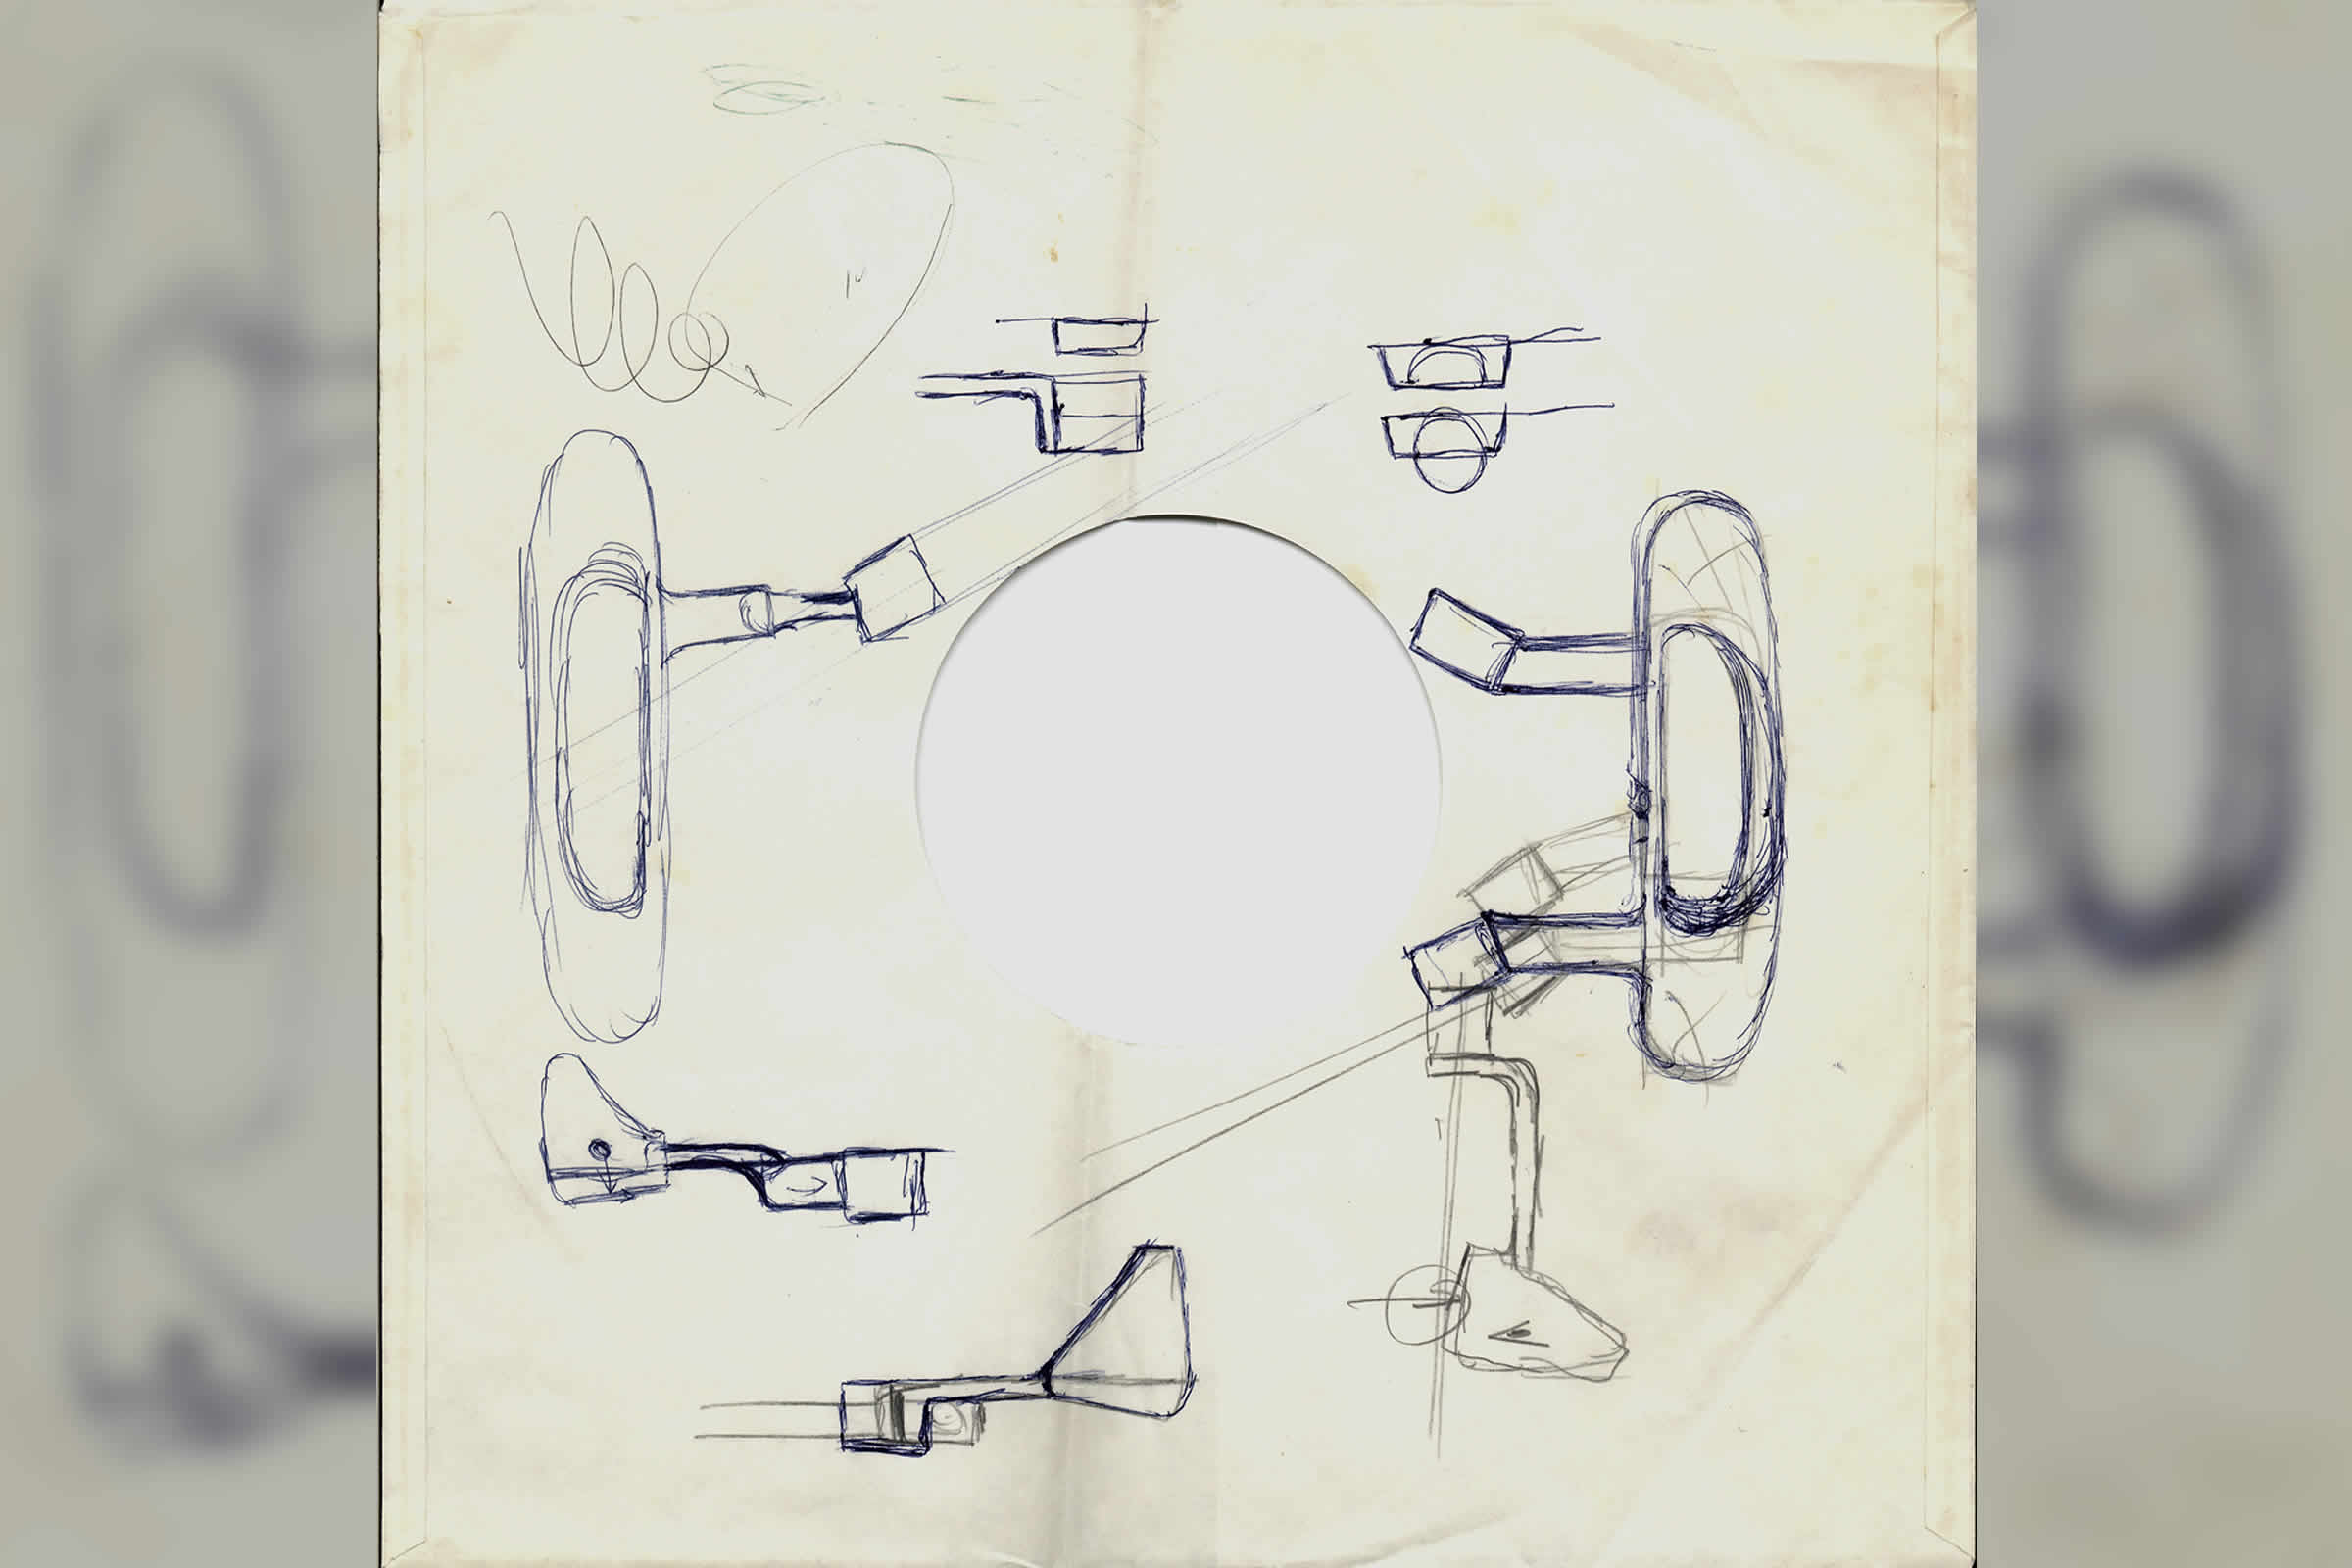 Anser putter drawn on record sleeve